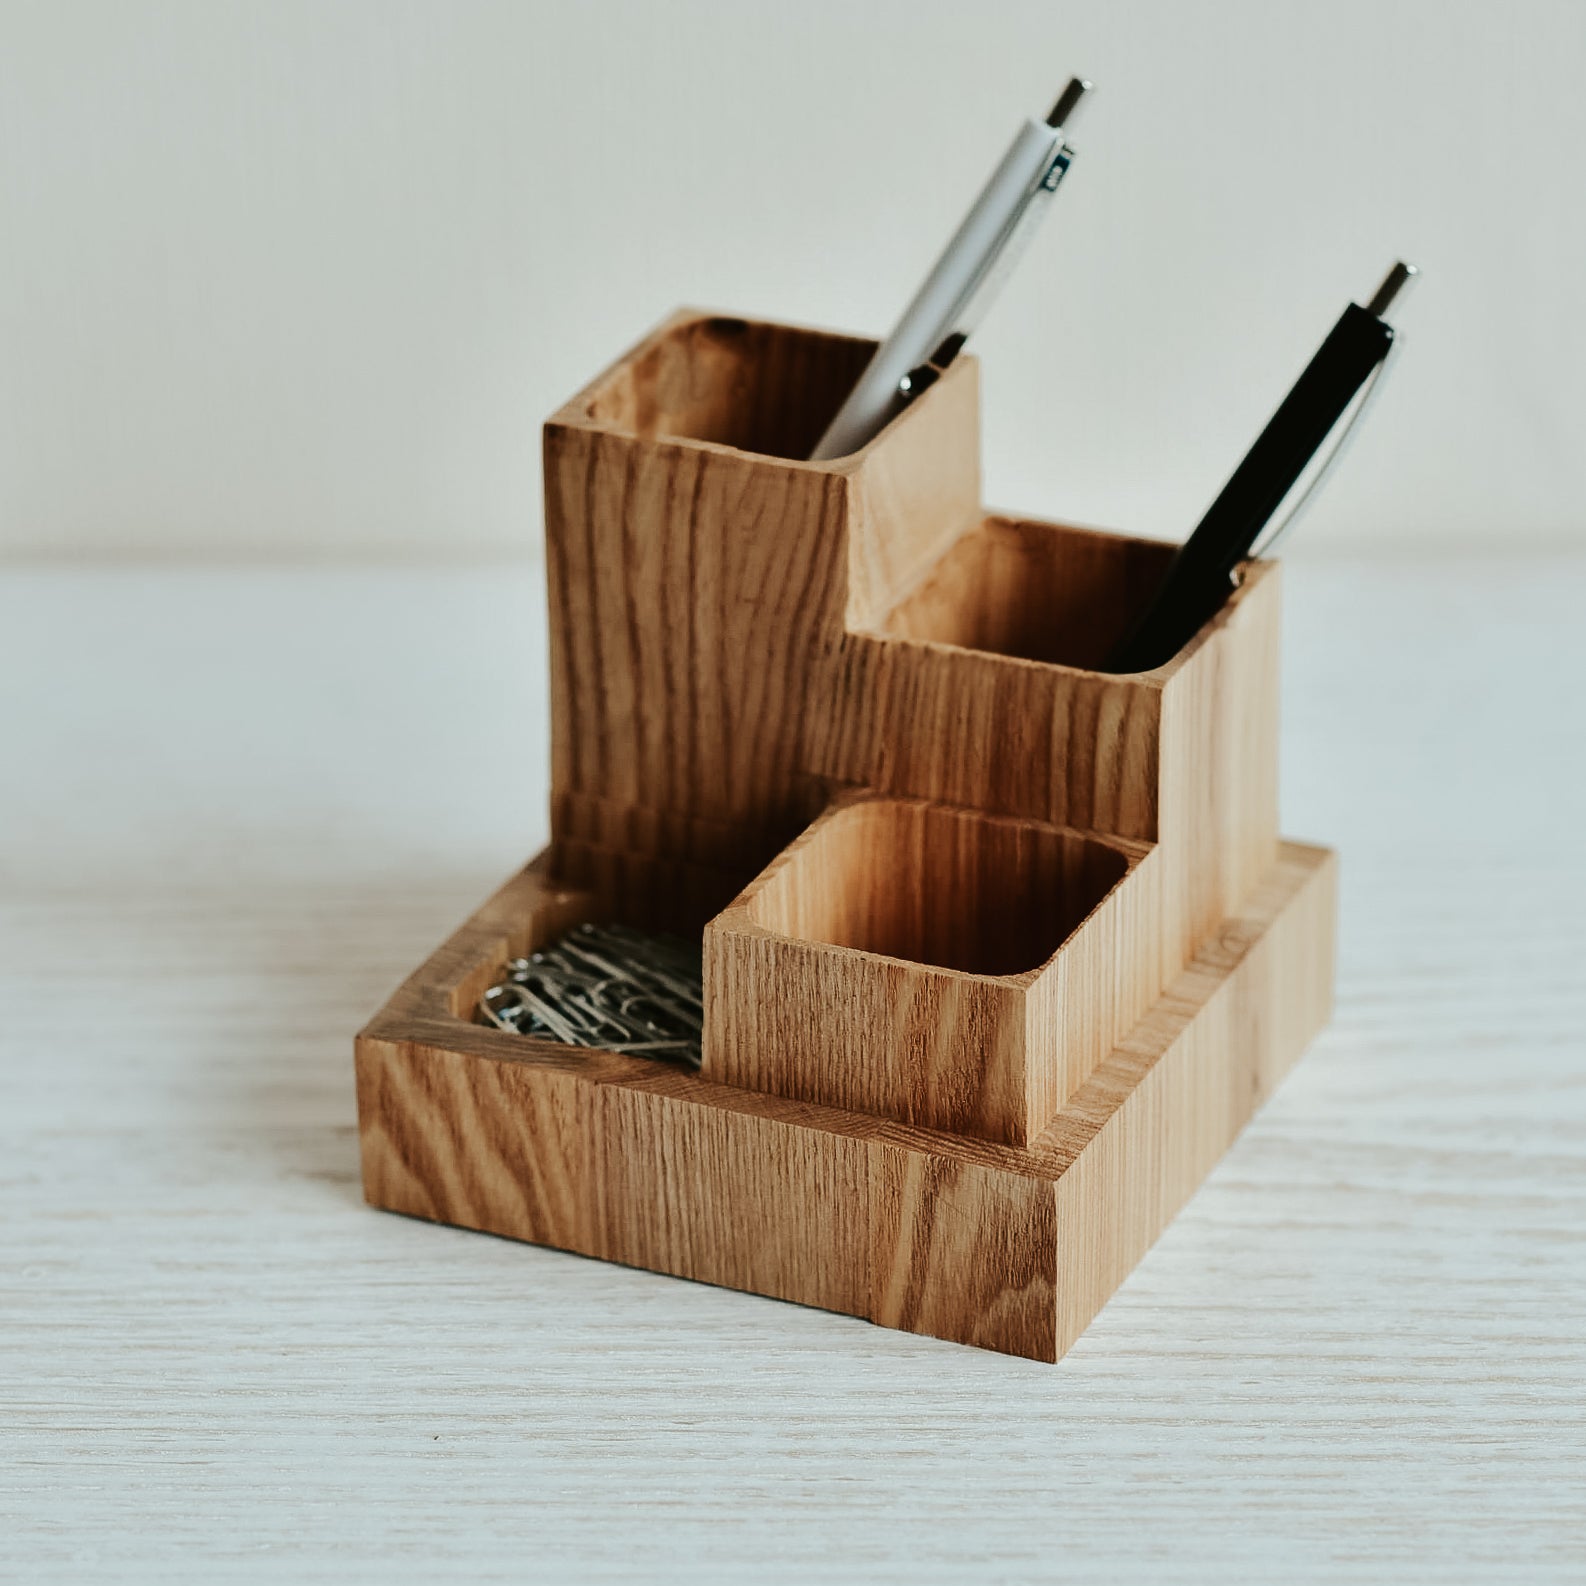 desk organizers, laptop stands, phone holders, and more, crafted from high-quality wood and metal, perfect for gifting.